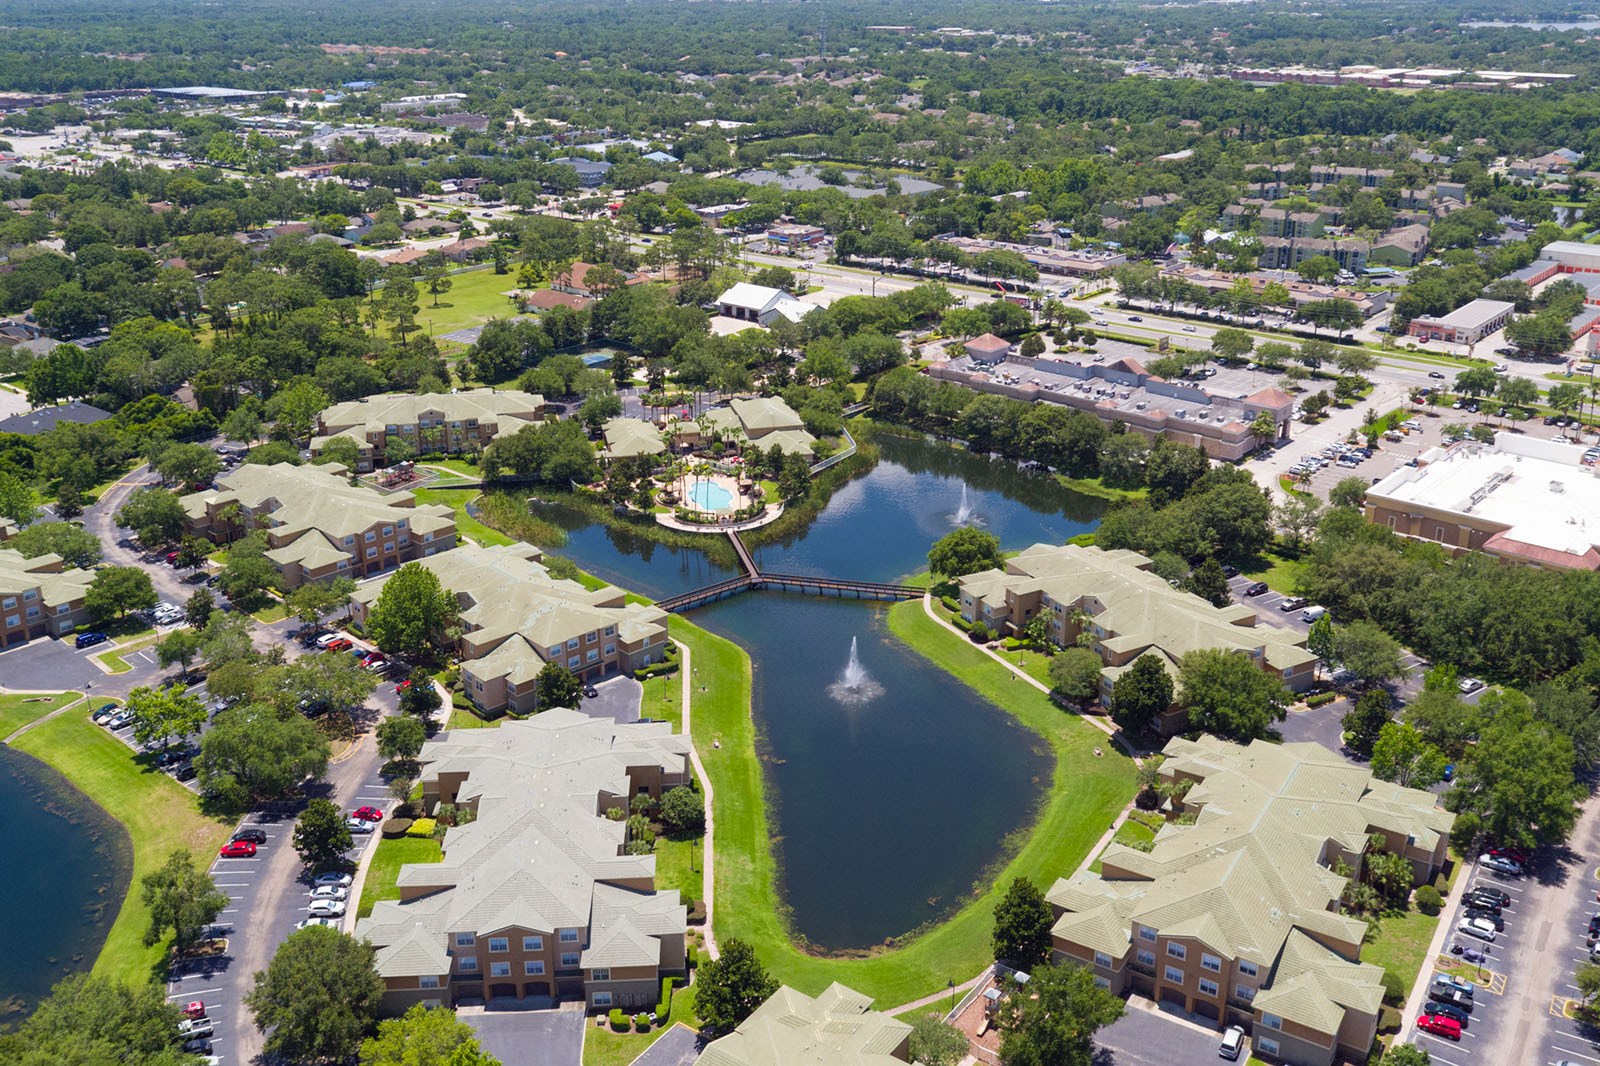 100 Best Apartments In Casselberry Fl With Reviews Rentcafé 